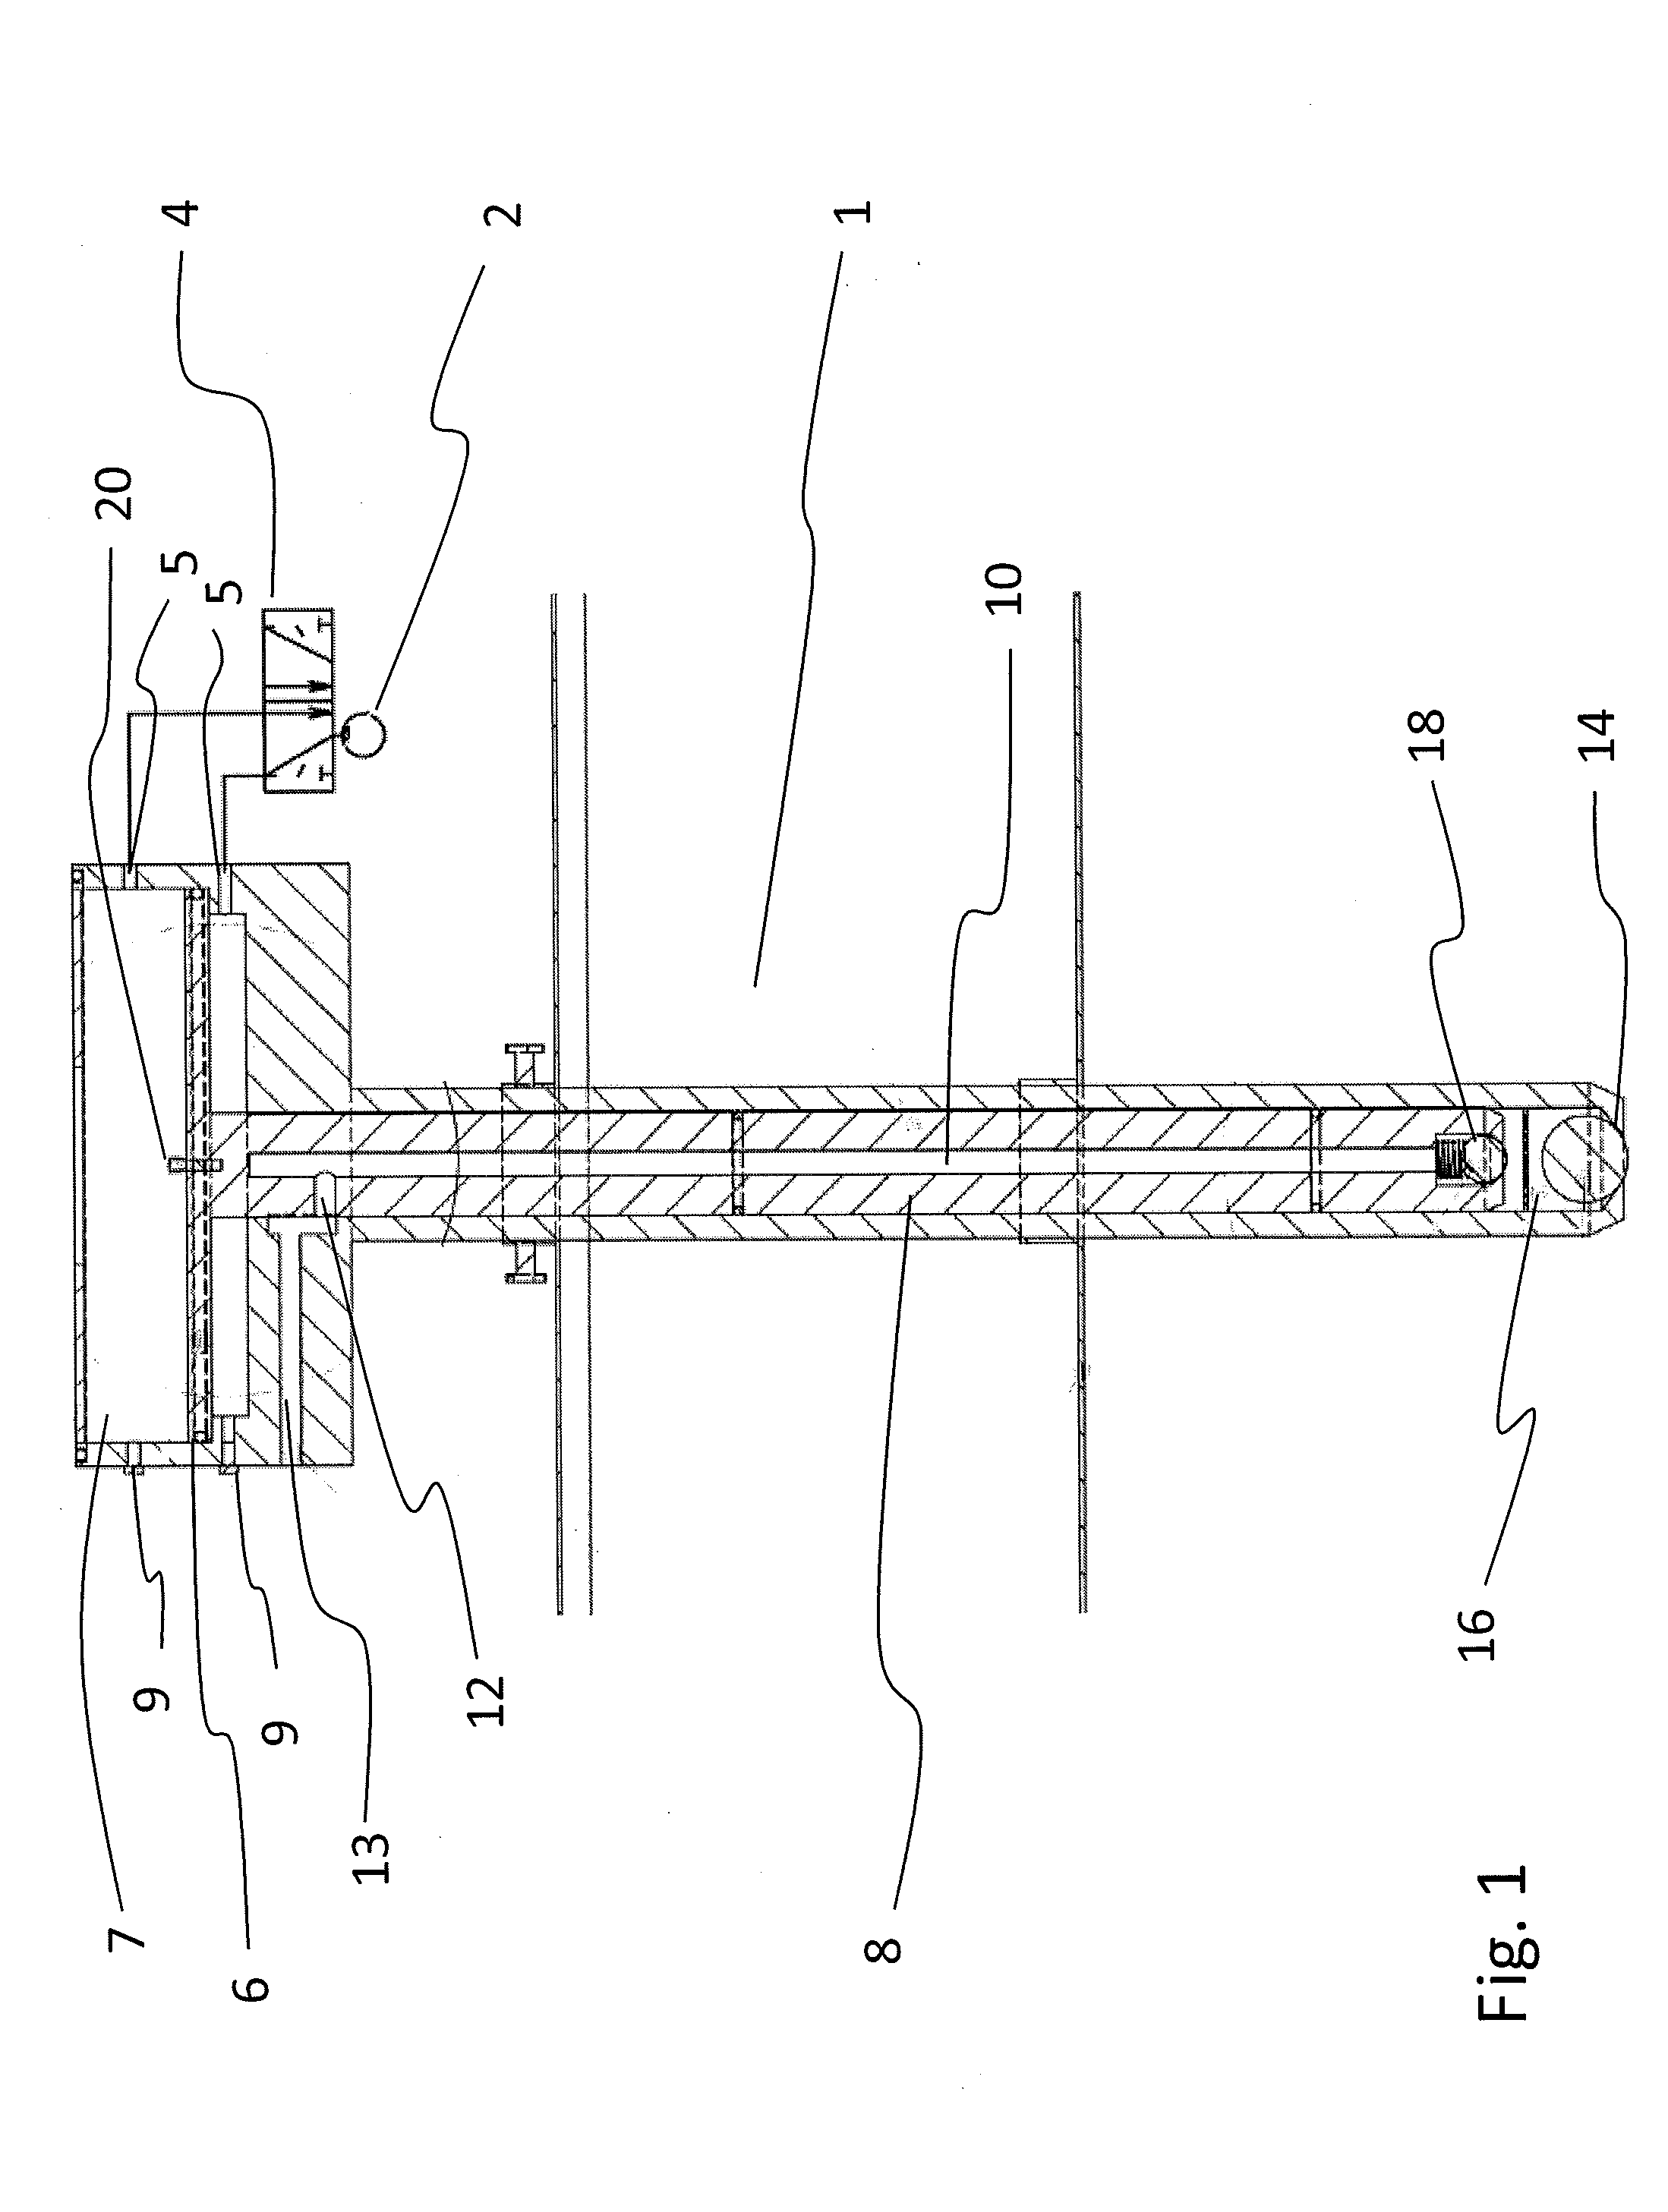 Metering device for delivery of a liquid or viscous substance